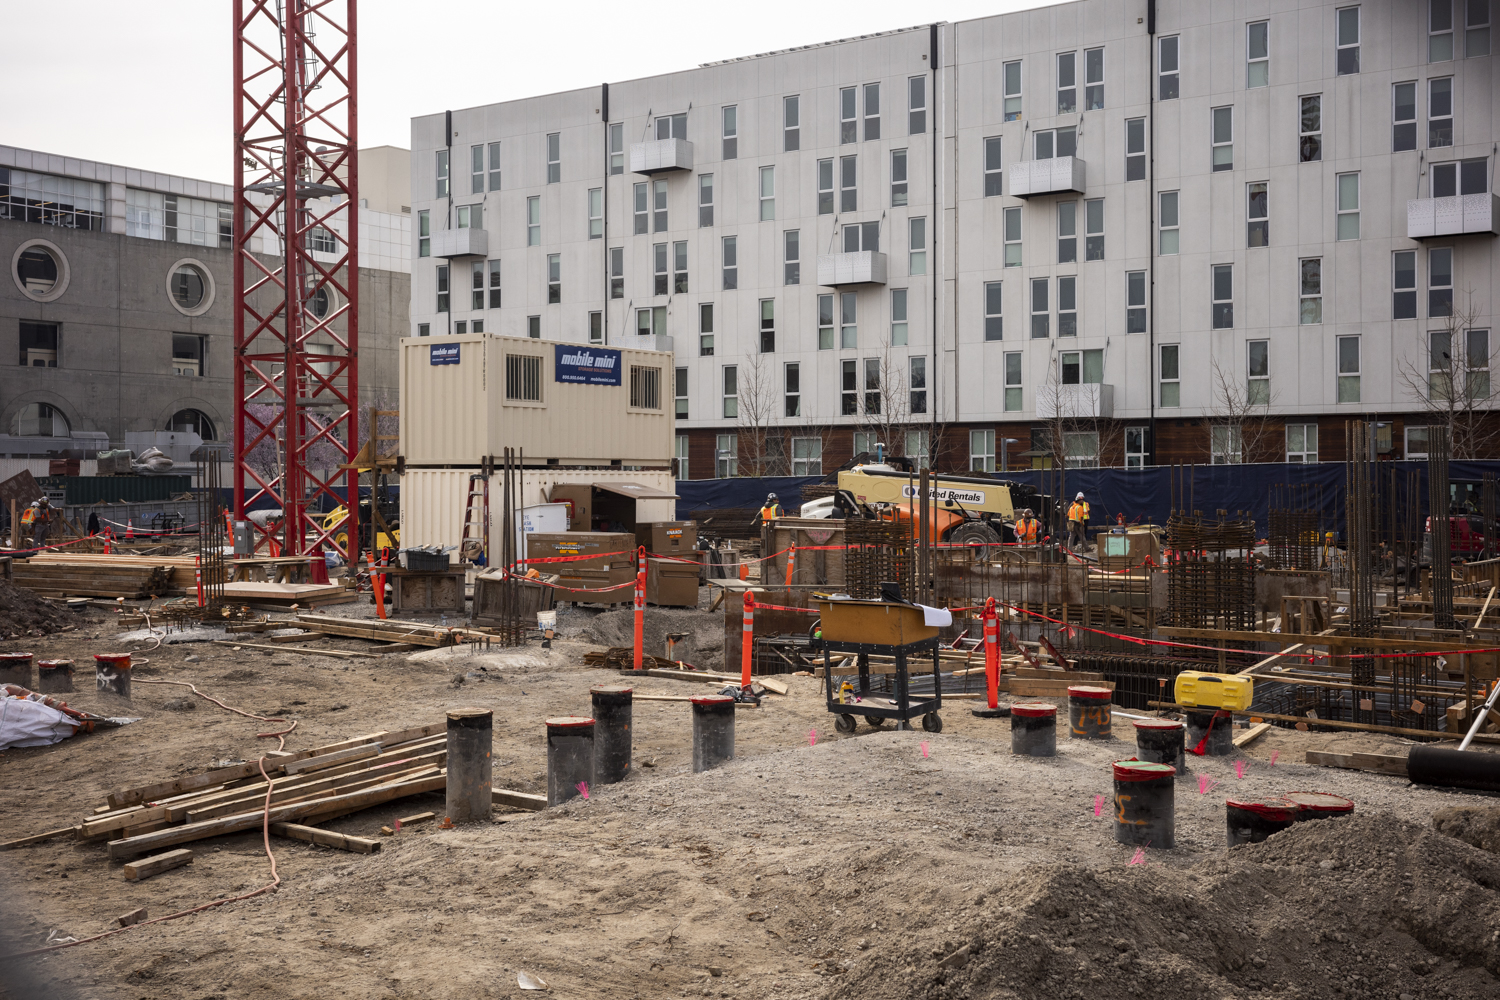 600 7th Street construction progress, image by Andrew Campbell Nelson